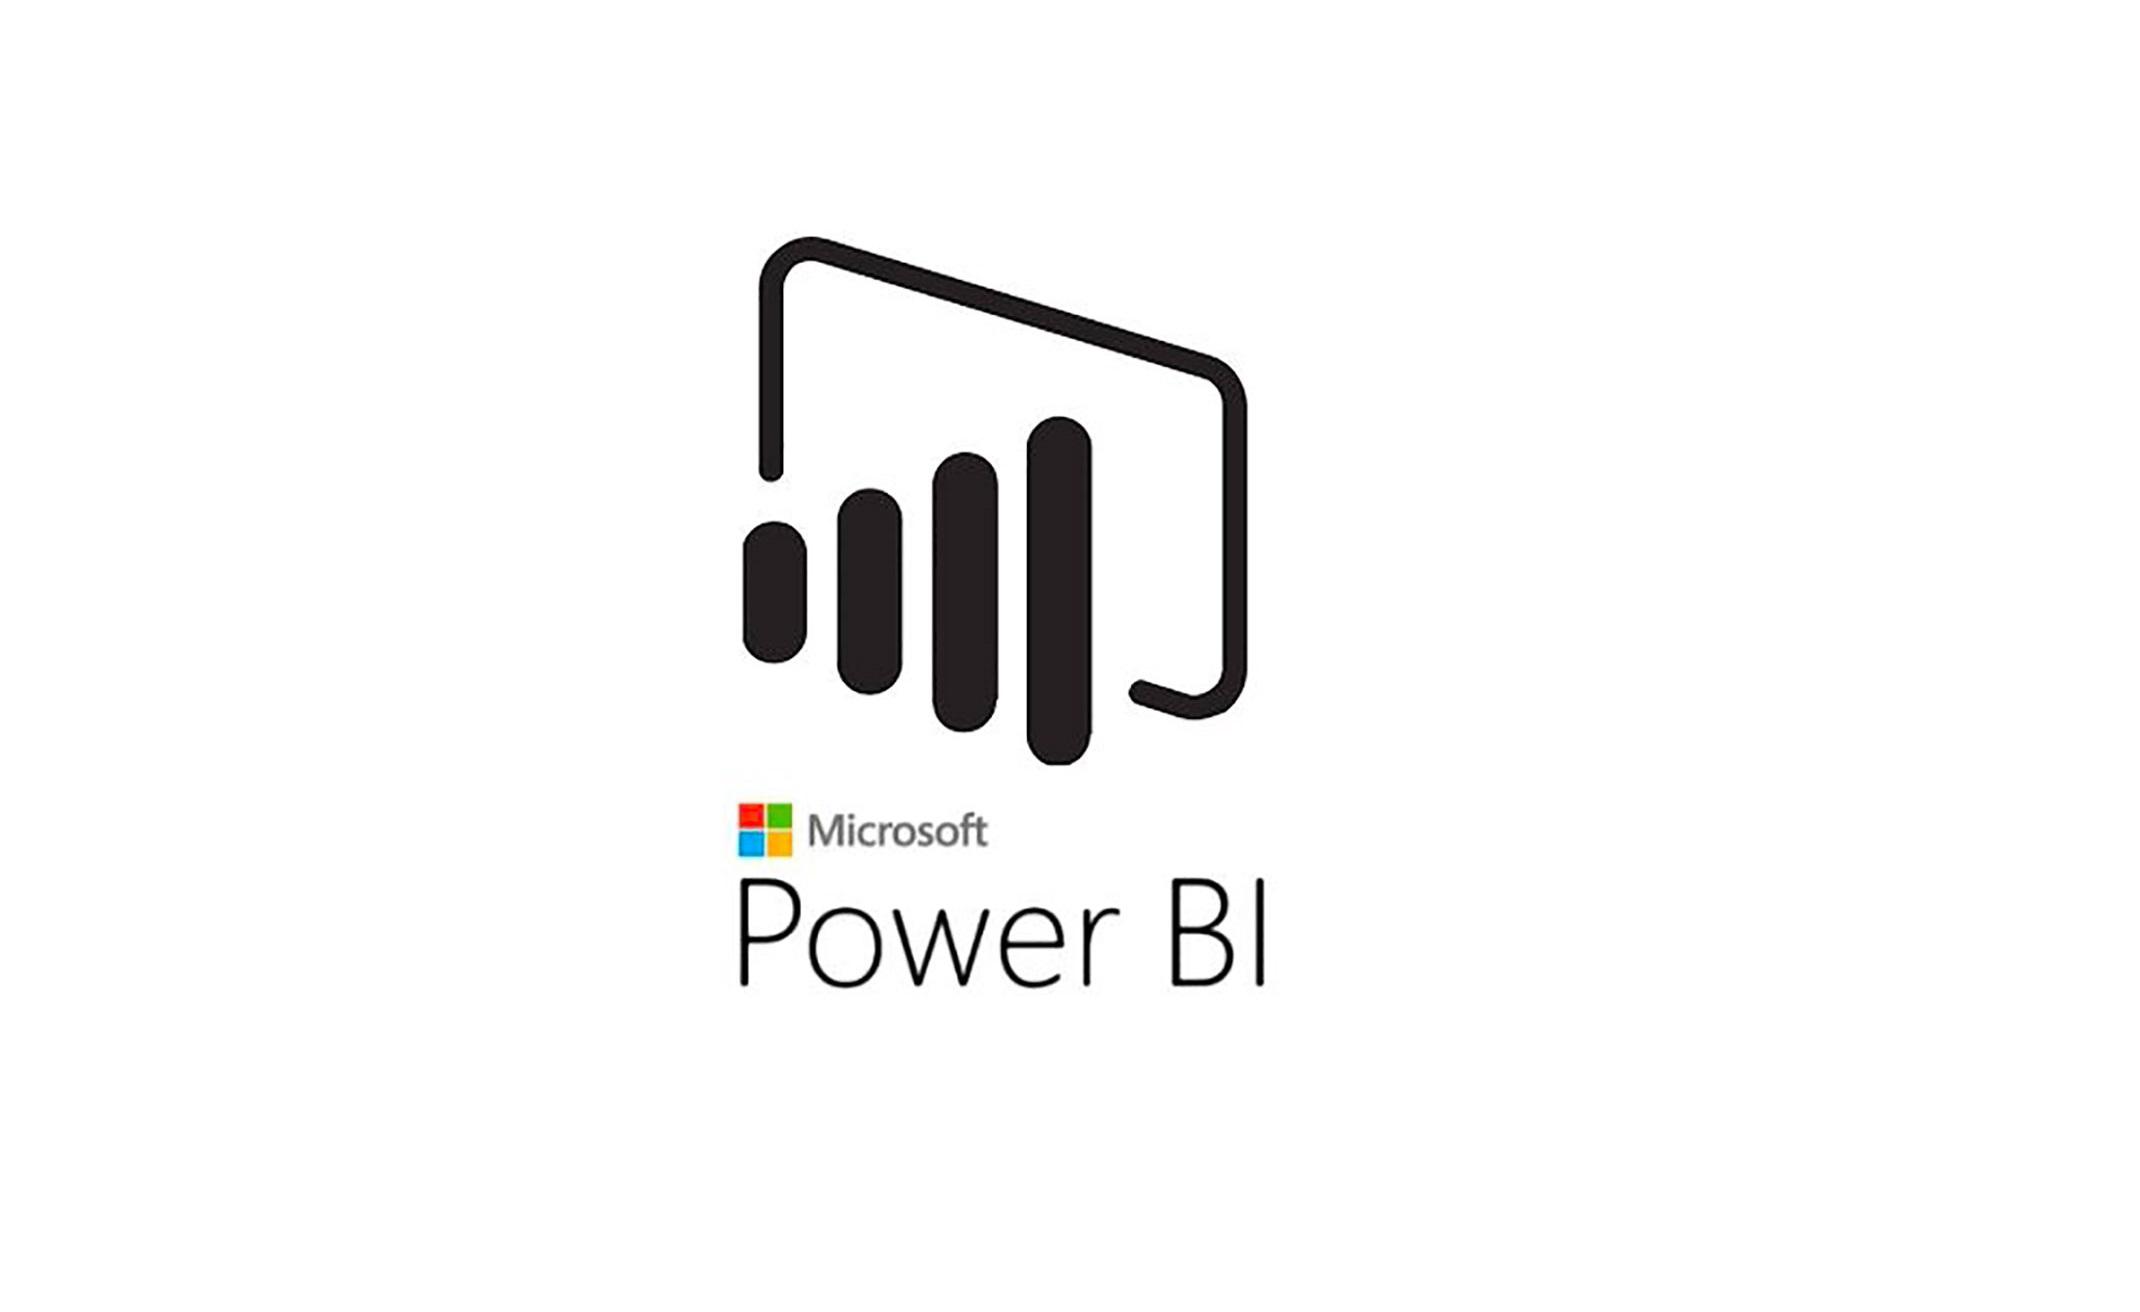 Microsoft Power BI Training in Long Island | Introduction to Power BI training for beginners | Getting started with Power BI | What is Power BI | January 18, 2020 - February 09, 2020